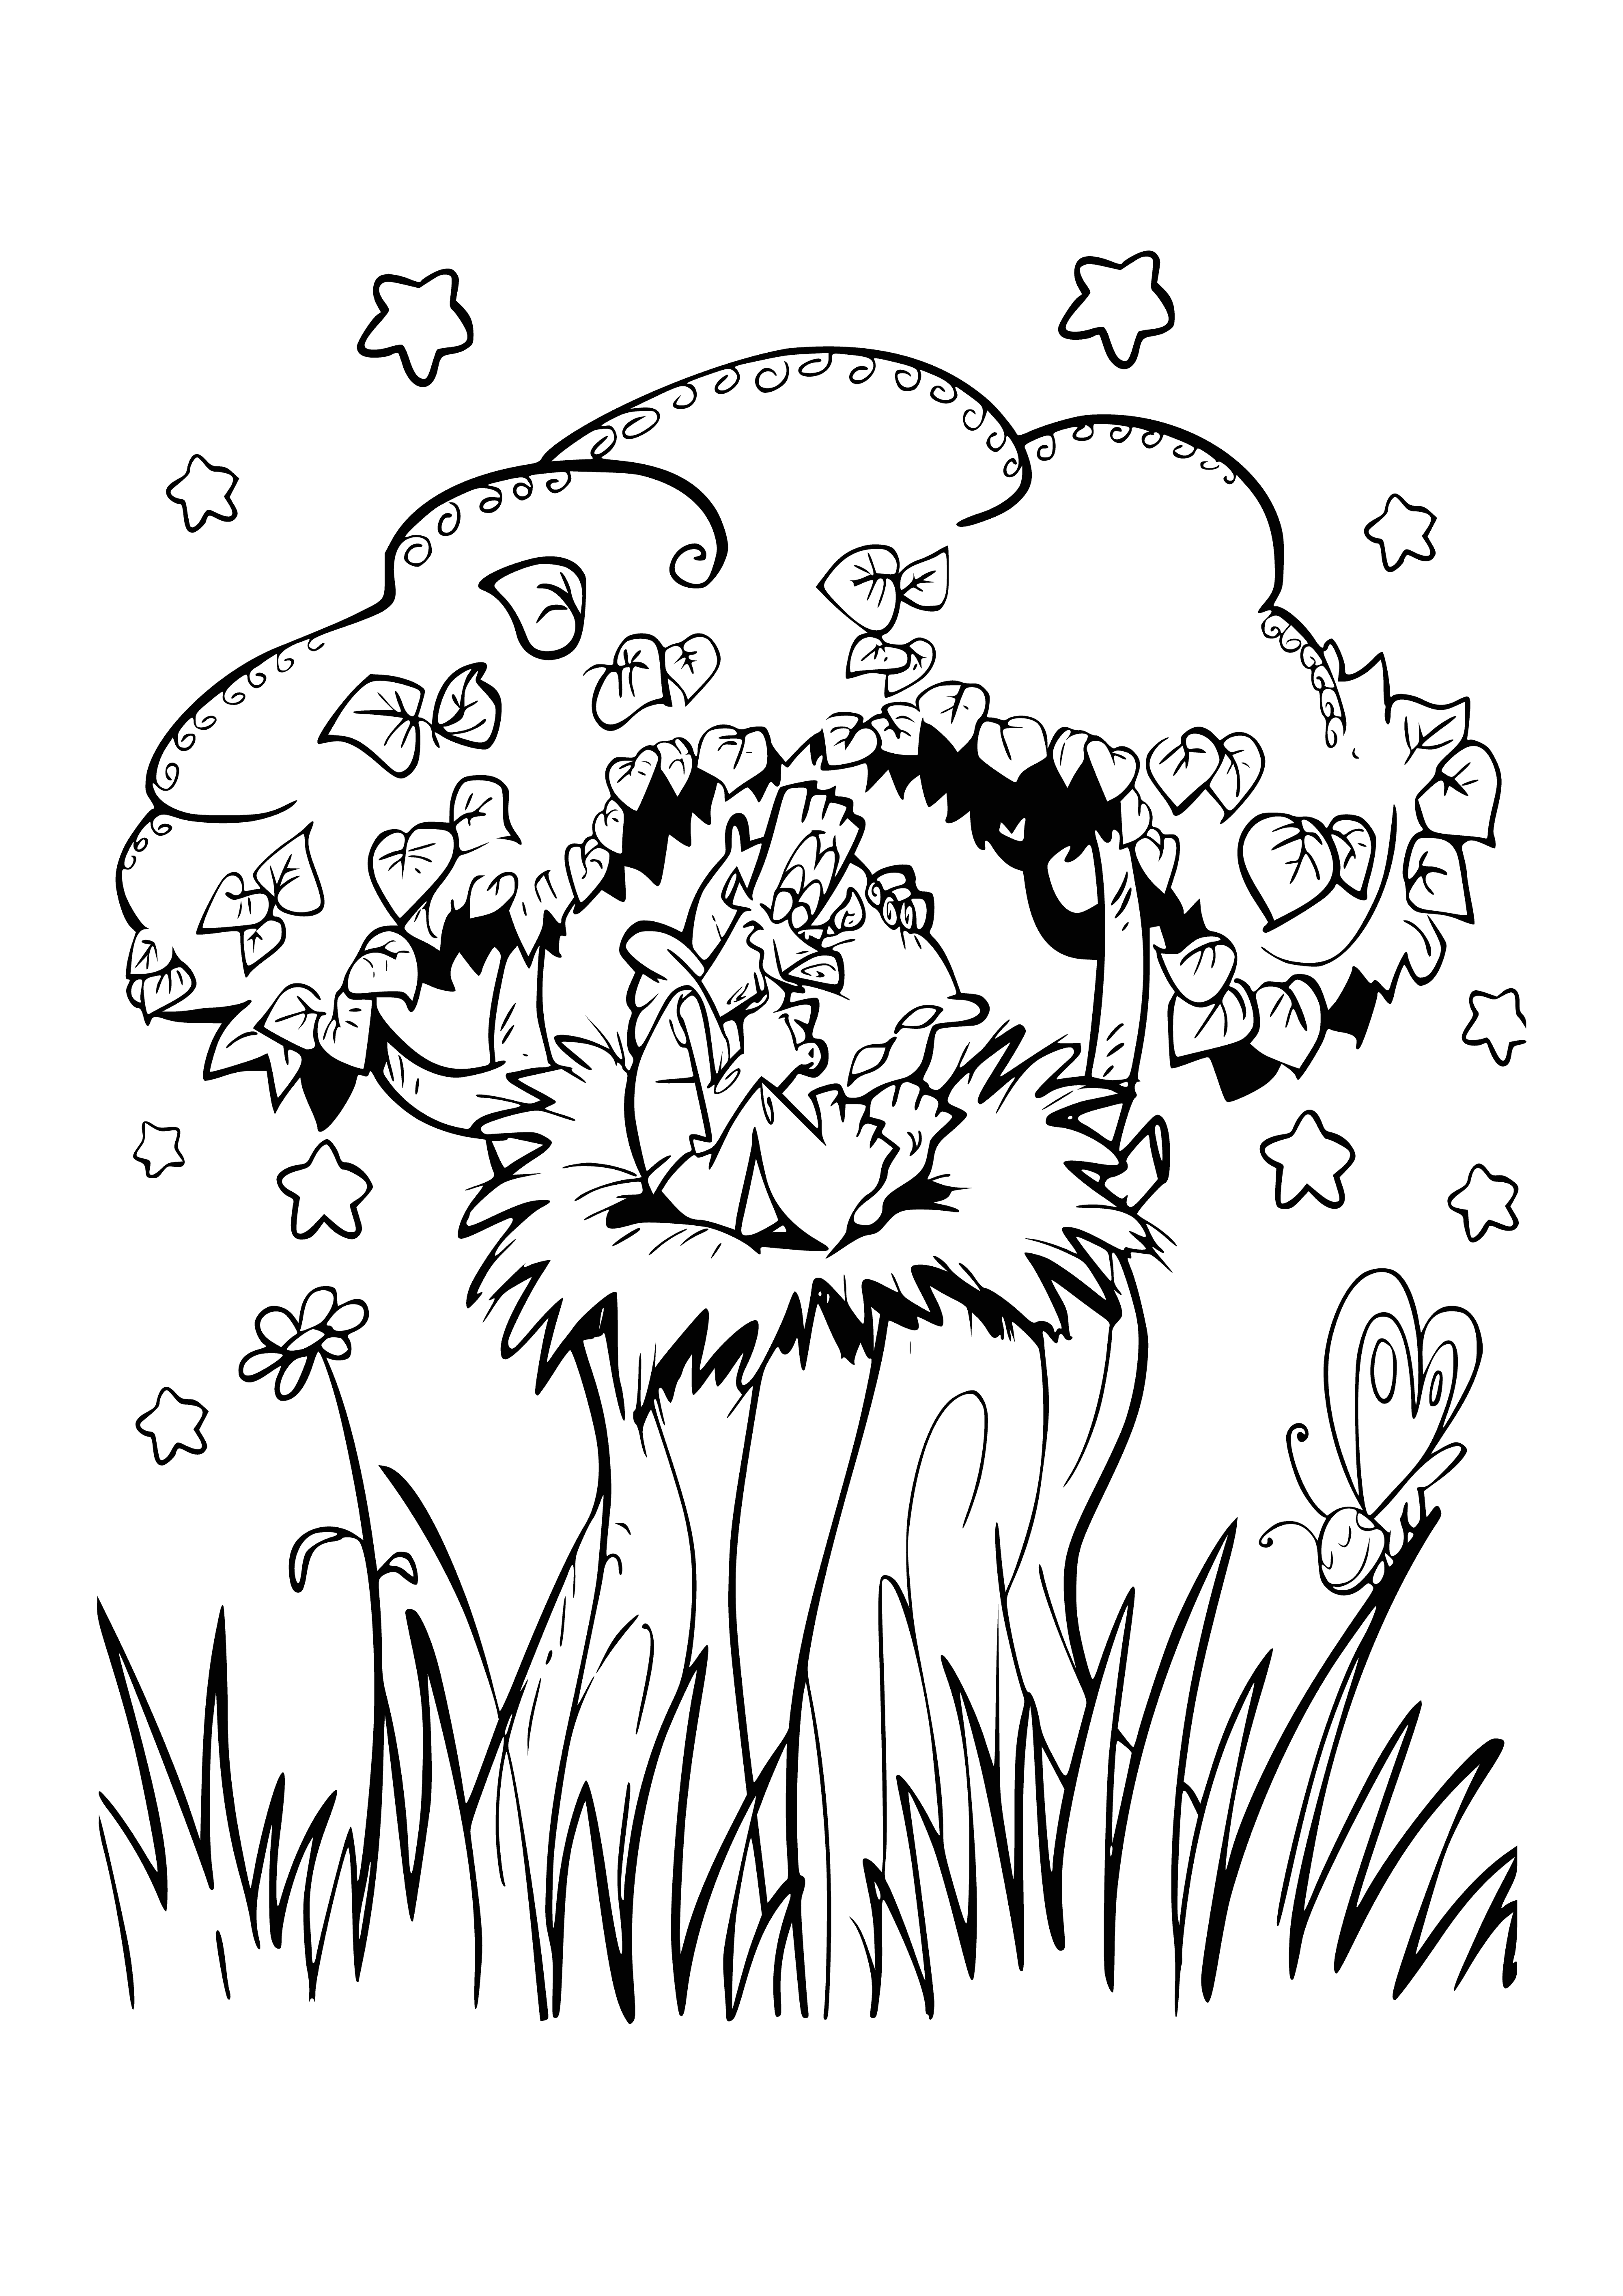 coloring page: In the center of the frame is a white bed on a tree, a lamp on its left & window on the right, while a forest lies in the background.